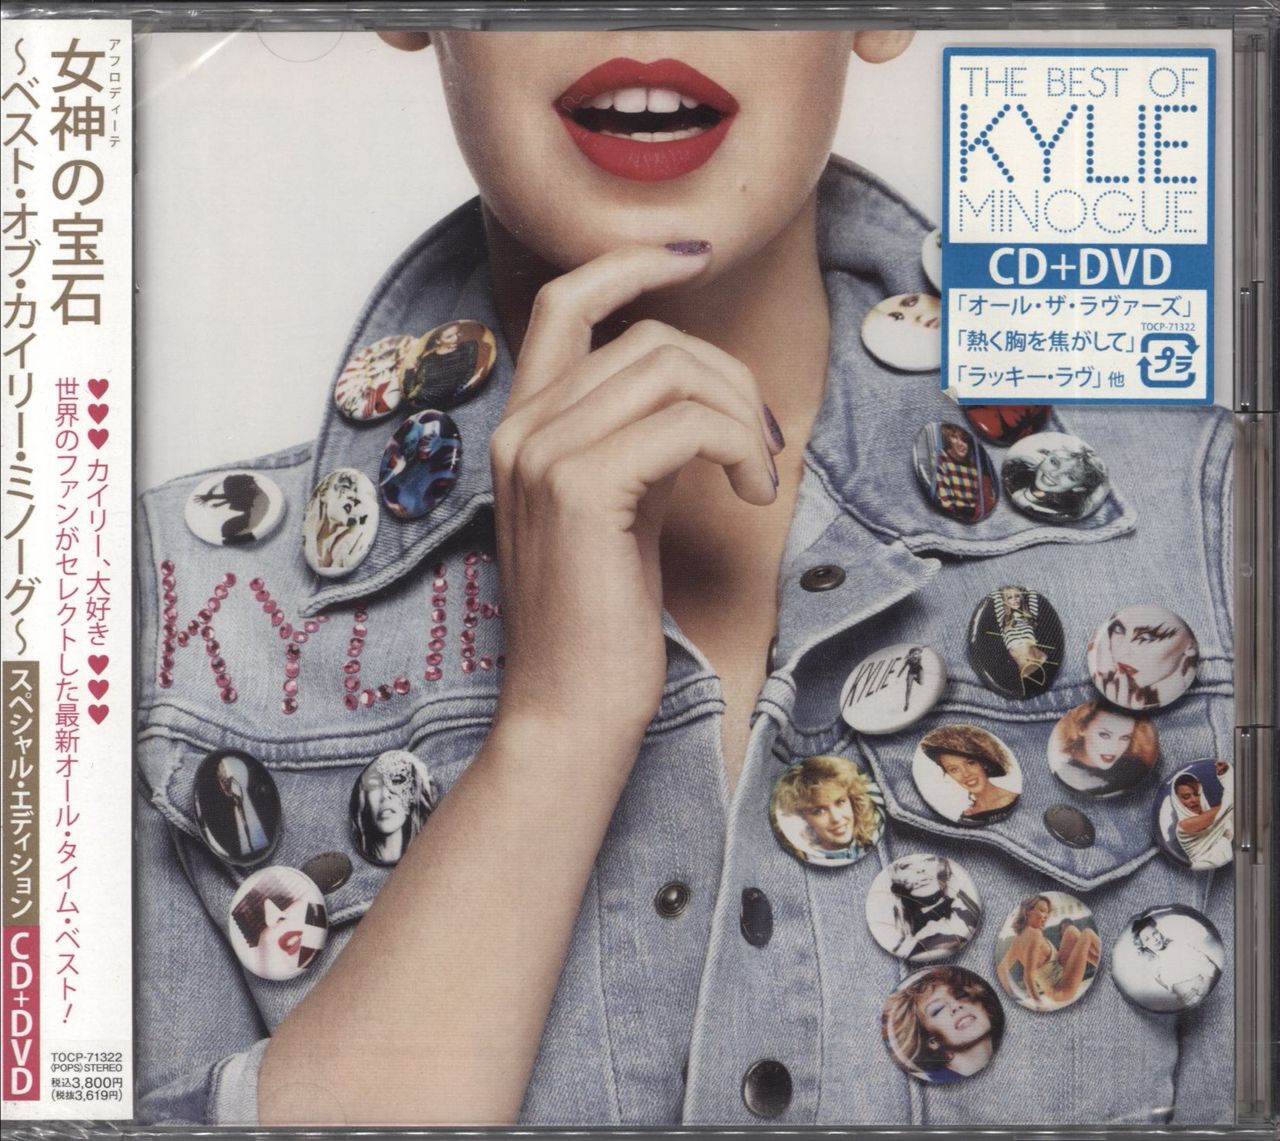 Kylie Minogue The Best Of - Sealed Japanese Promo 2-disc CD